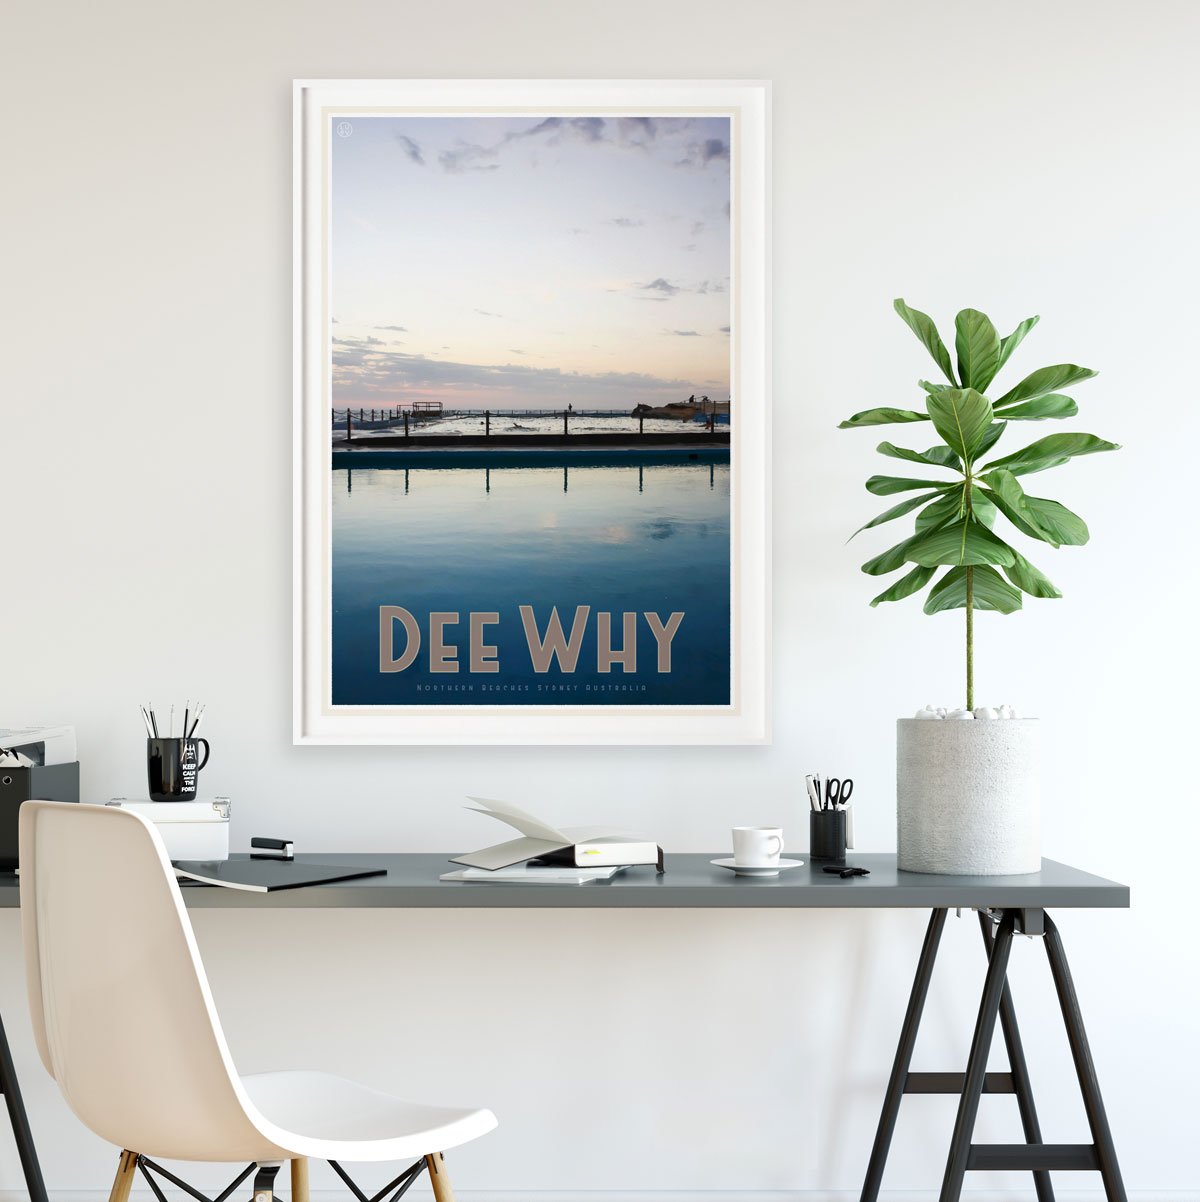 Dee Why poster vintage travel style by places we luv